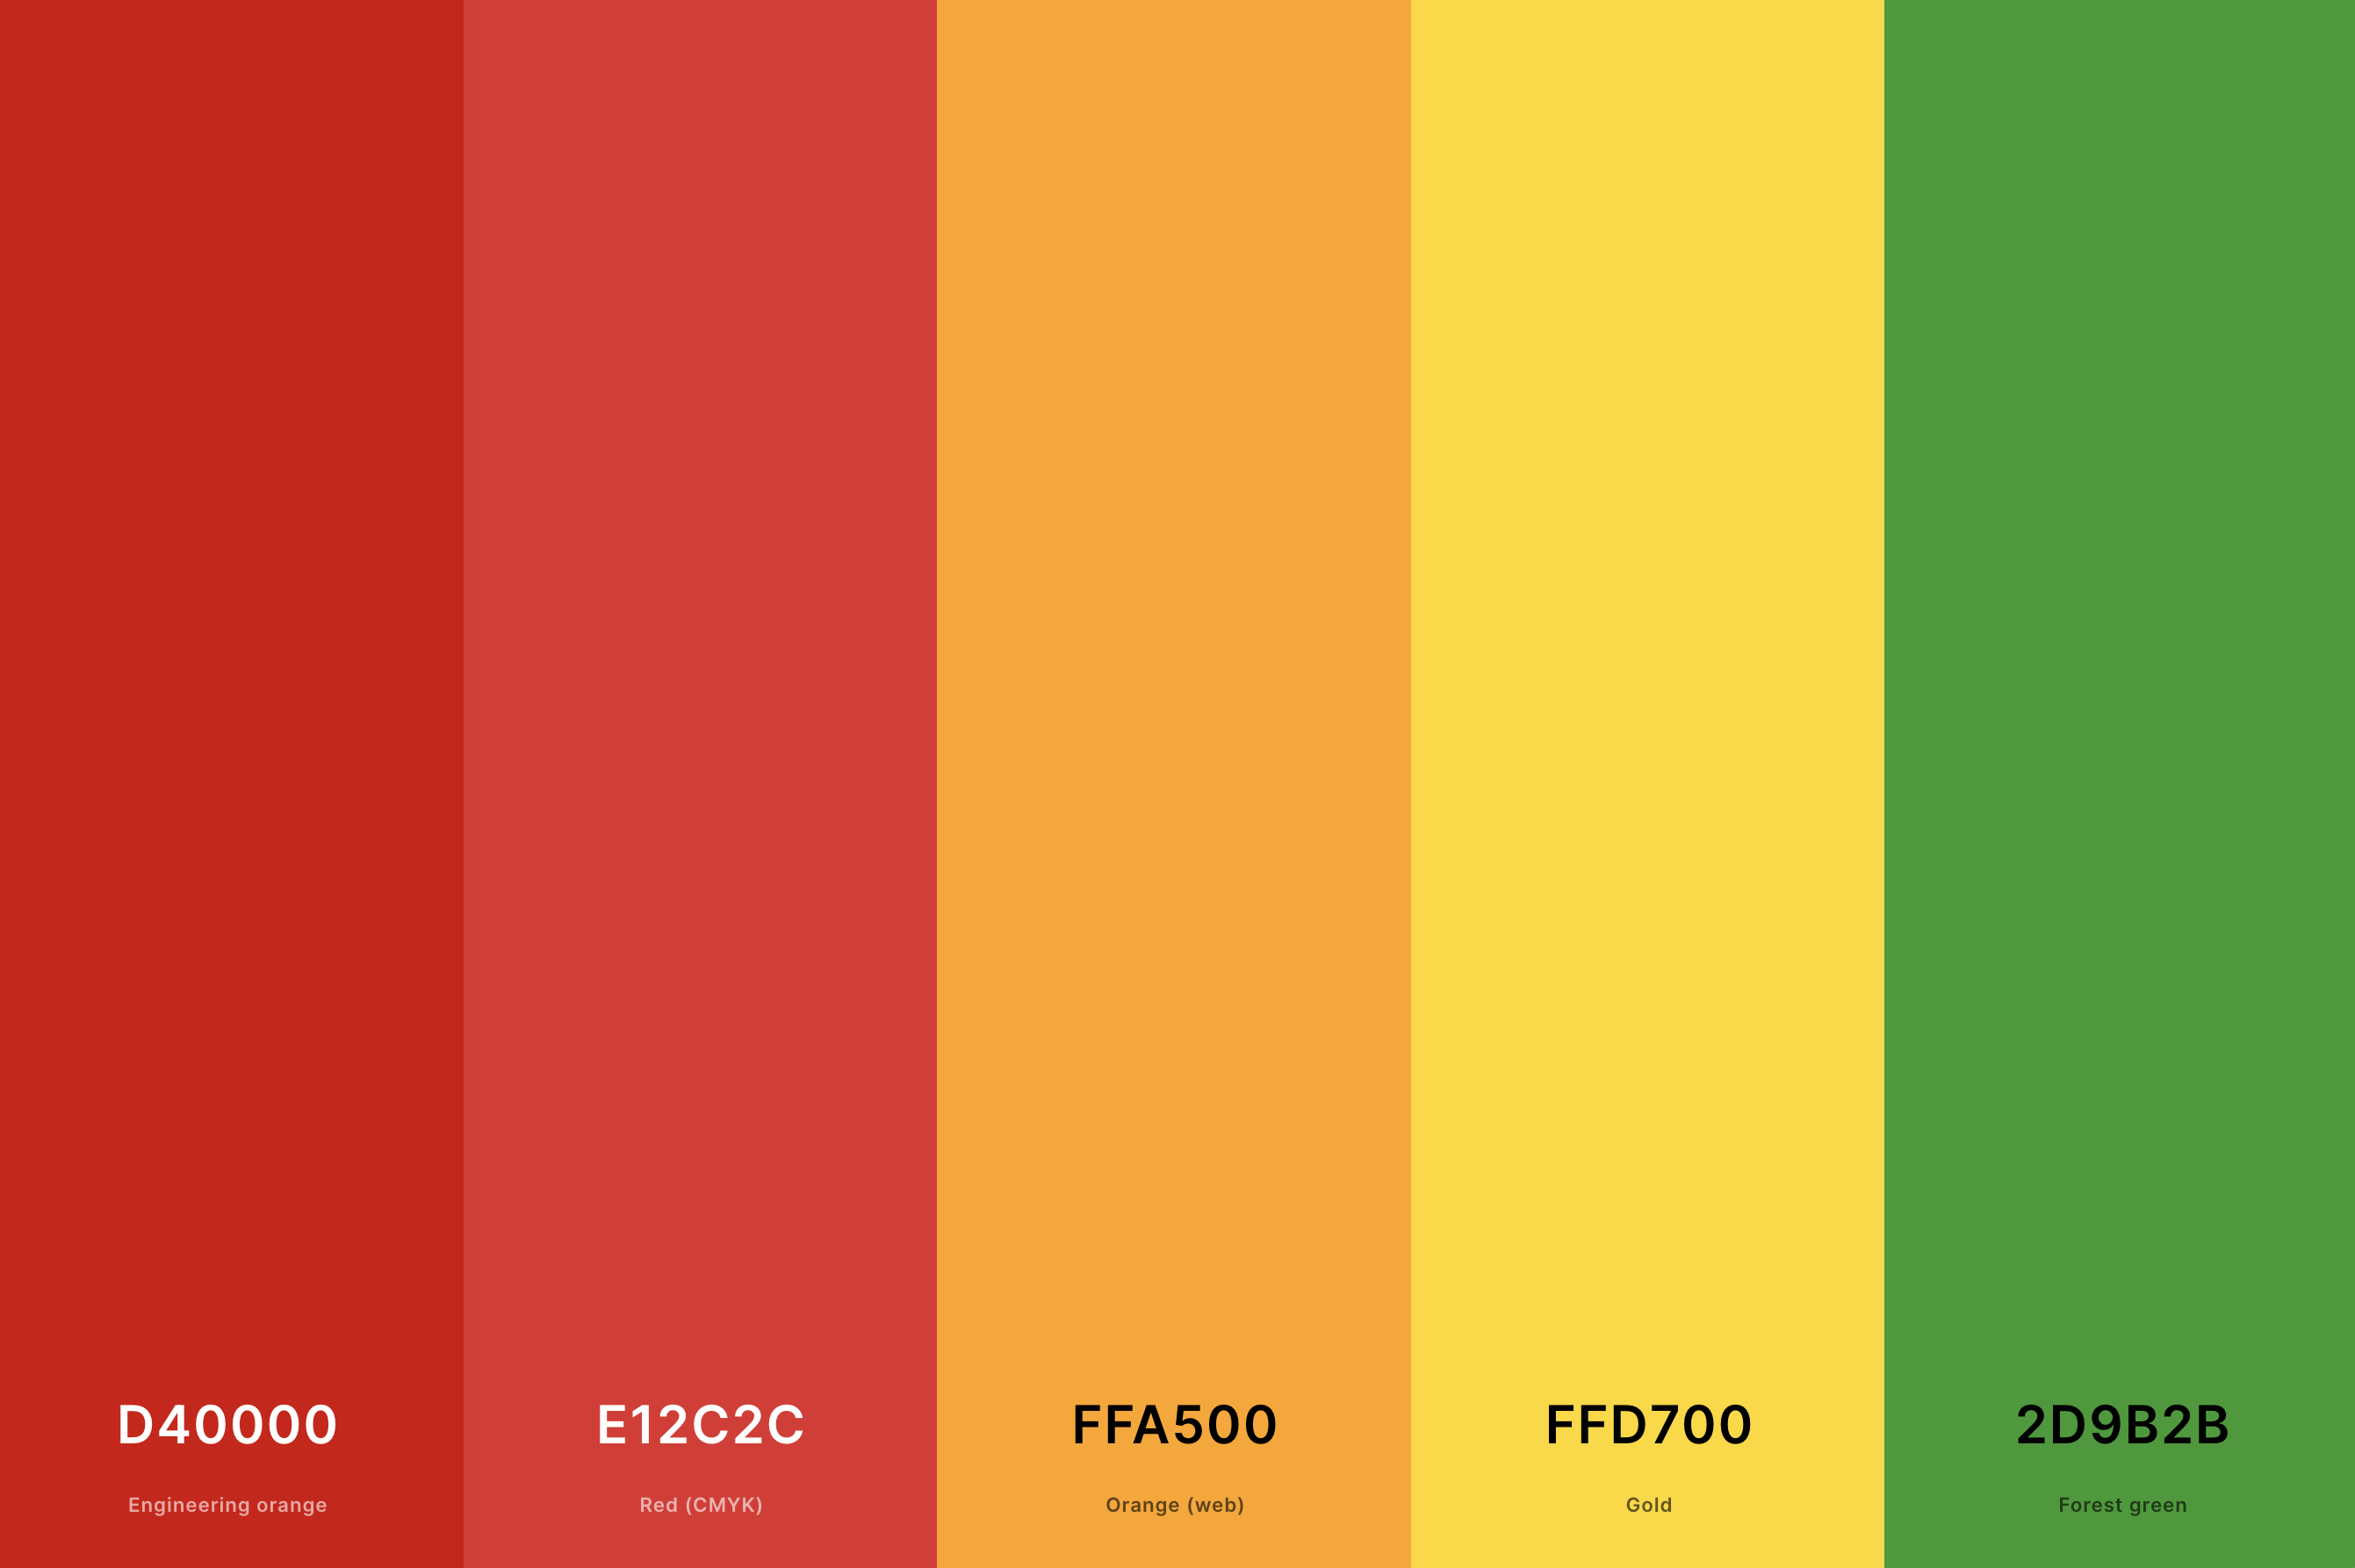 13. Red, Yellow And Green Color Palette Color Palette with Engineering Orange (Hex #D40000) + Red (Cmyk) (Hex #E12C2C) + Orange (Web) (Hex #FFA500) + Gold (Hex #FFD700) + Forest Green (Hex #2D9B2B) Color Palette with Hex Codes